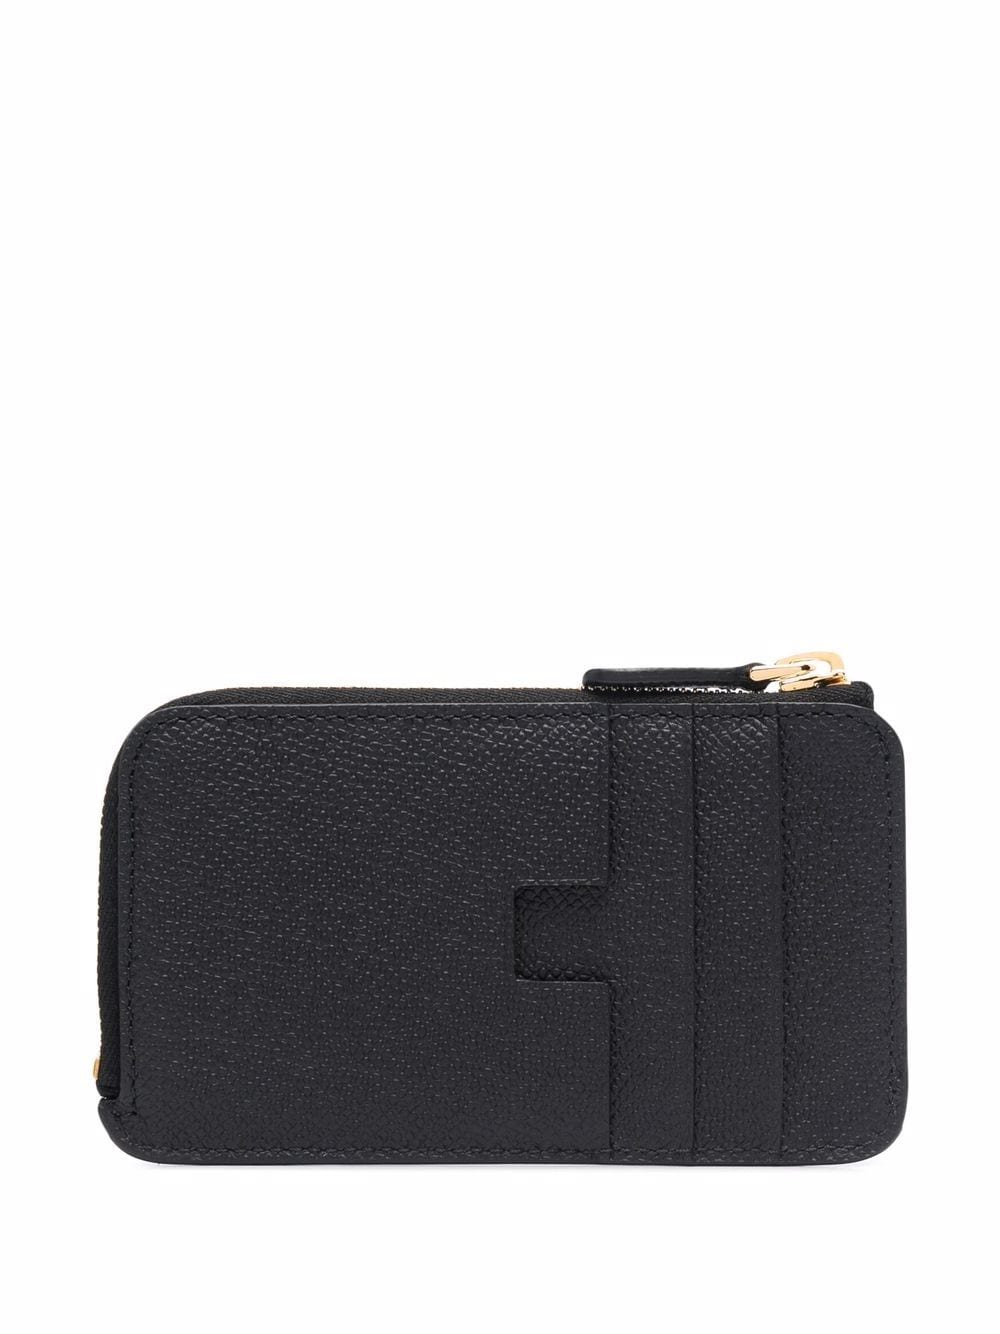 Shop TOM FORD logo-print leather wallet with Express Delivery - FARFETCH